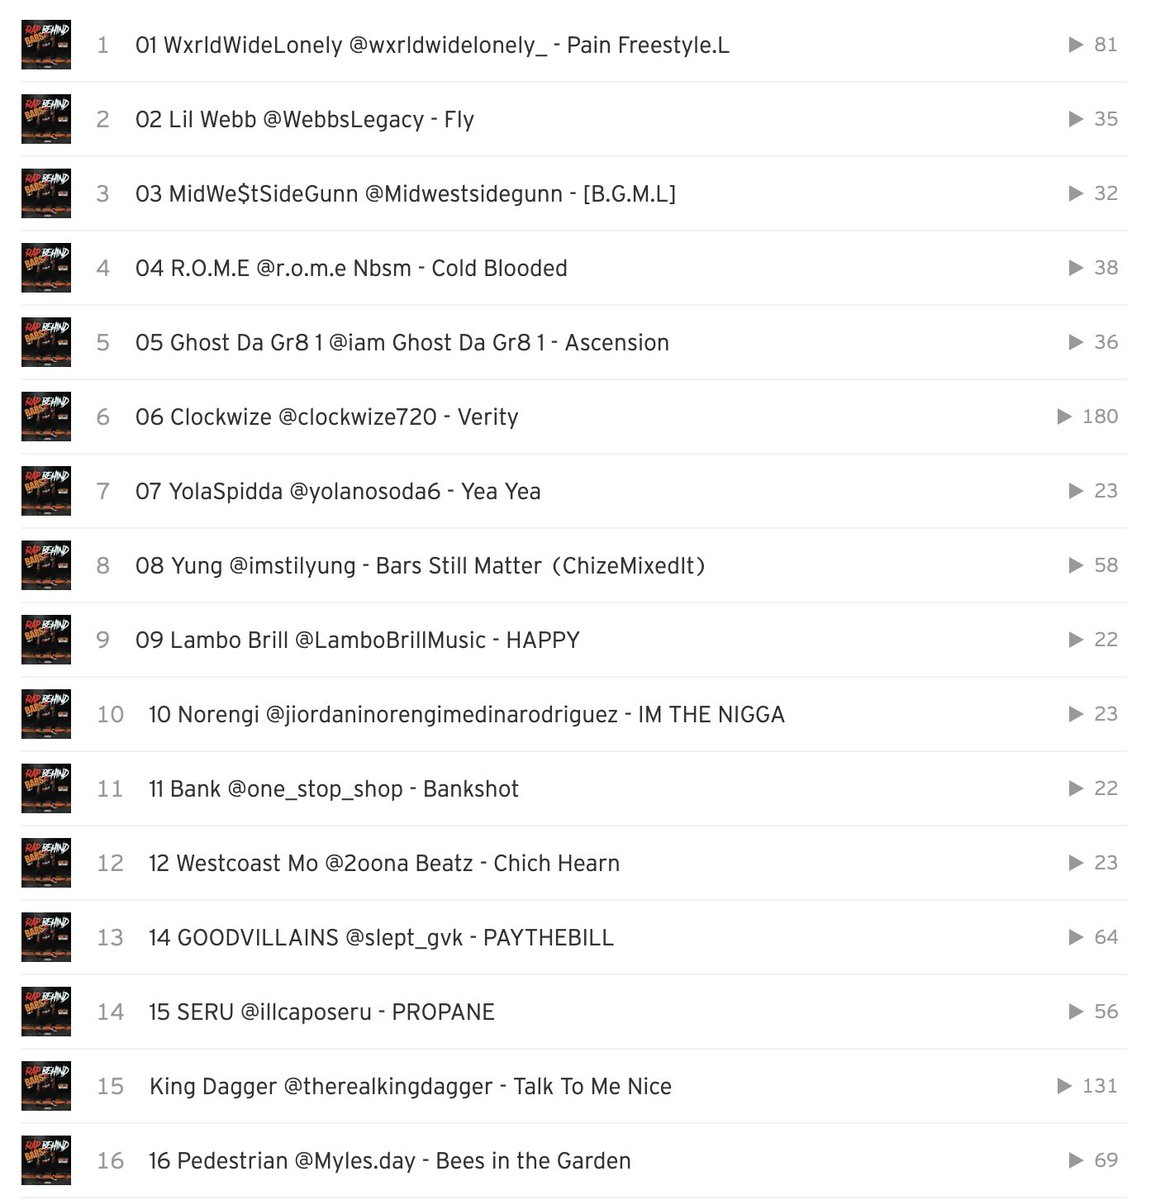 On June 20, DaBlock365 posted 'Rap Behind Bars Vol. 7,' "presented by Benny The Butcher," to their  @SoundCloud & other small sites. There are 37 tracks on the tape. The highest play count is 1,414. If you remove that outlier, the avg play count is 60. https://soundcloud.com/dablock365/sets/rap-behind-bars-vol-7-presented-by-benny-the-butcher